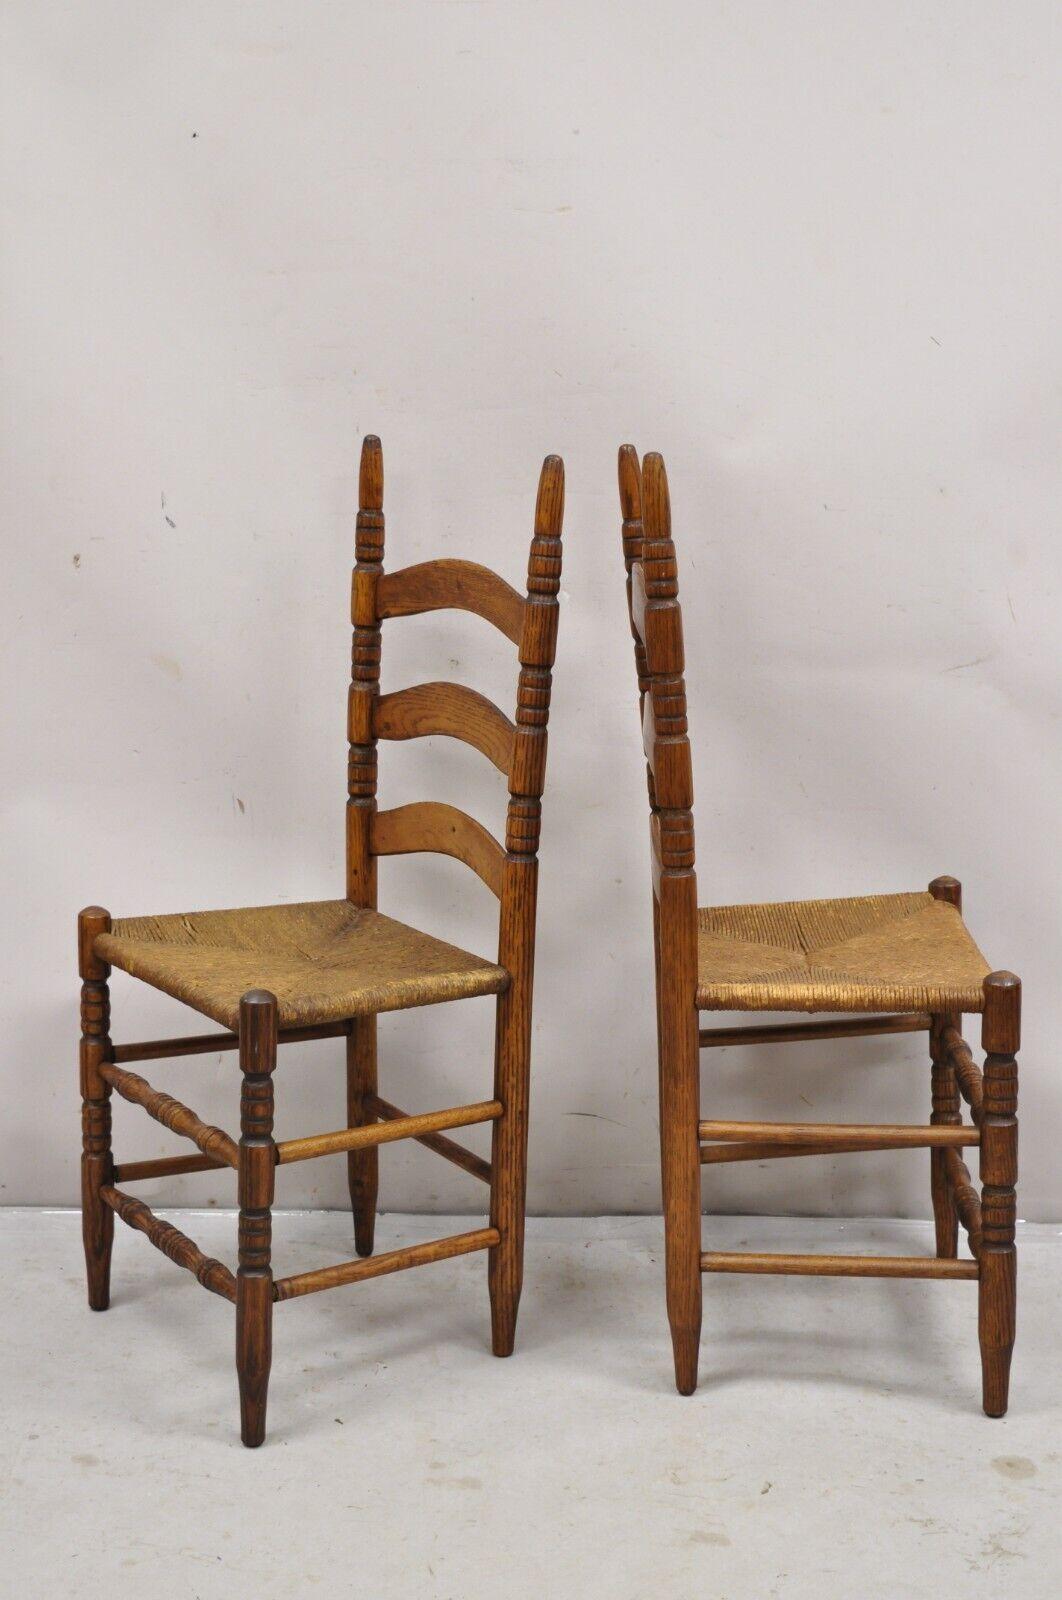 Antique Ladderback Primitive Rustic Oak Wood Rush Seat Dining Chairs - Set of 4 For Sale 4